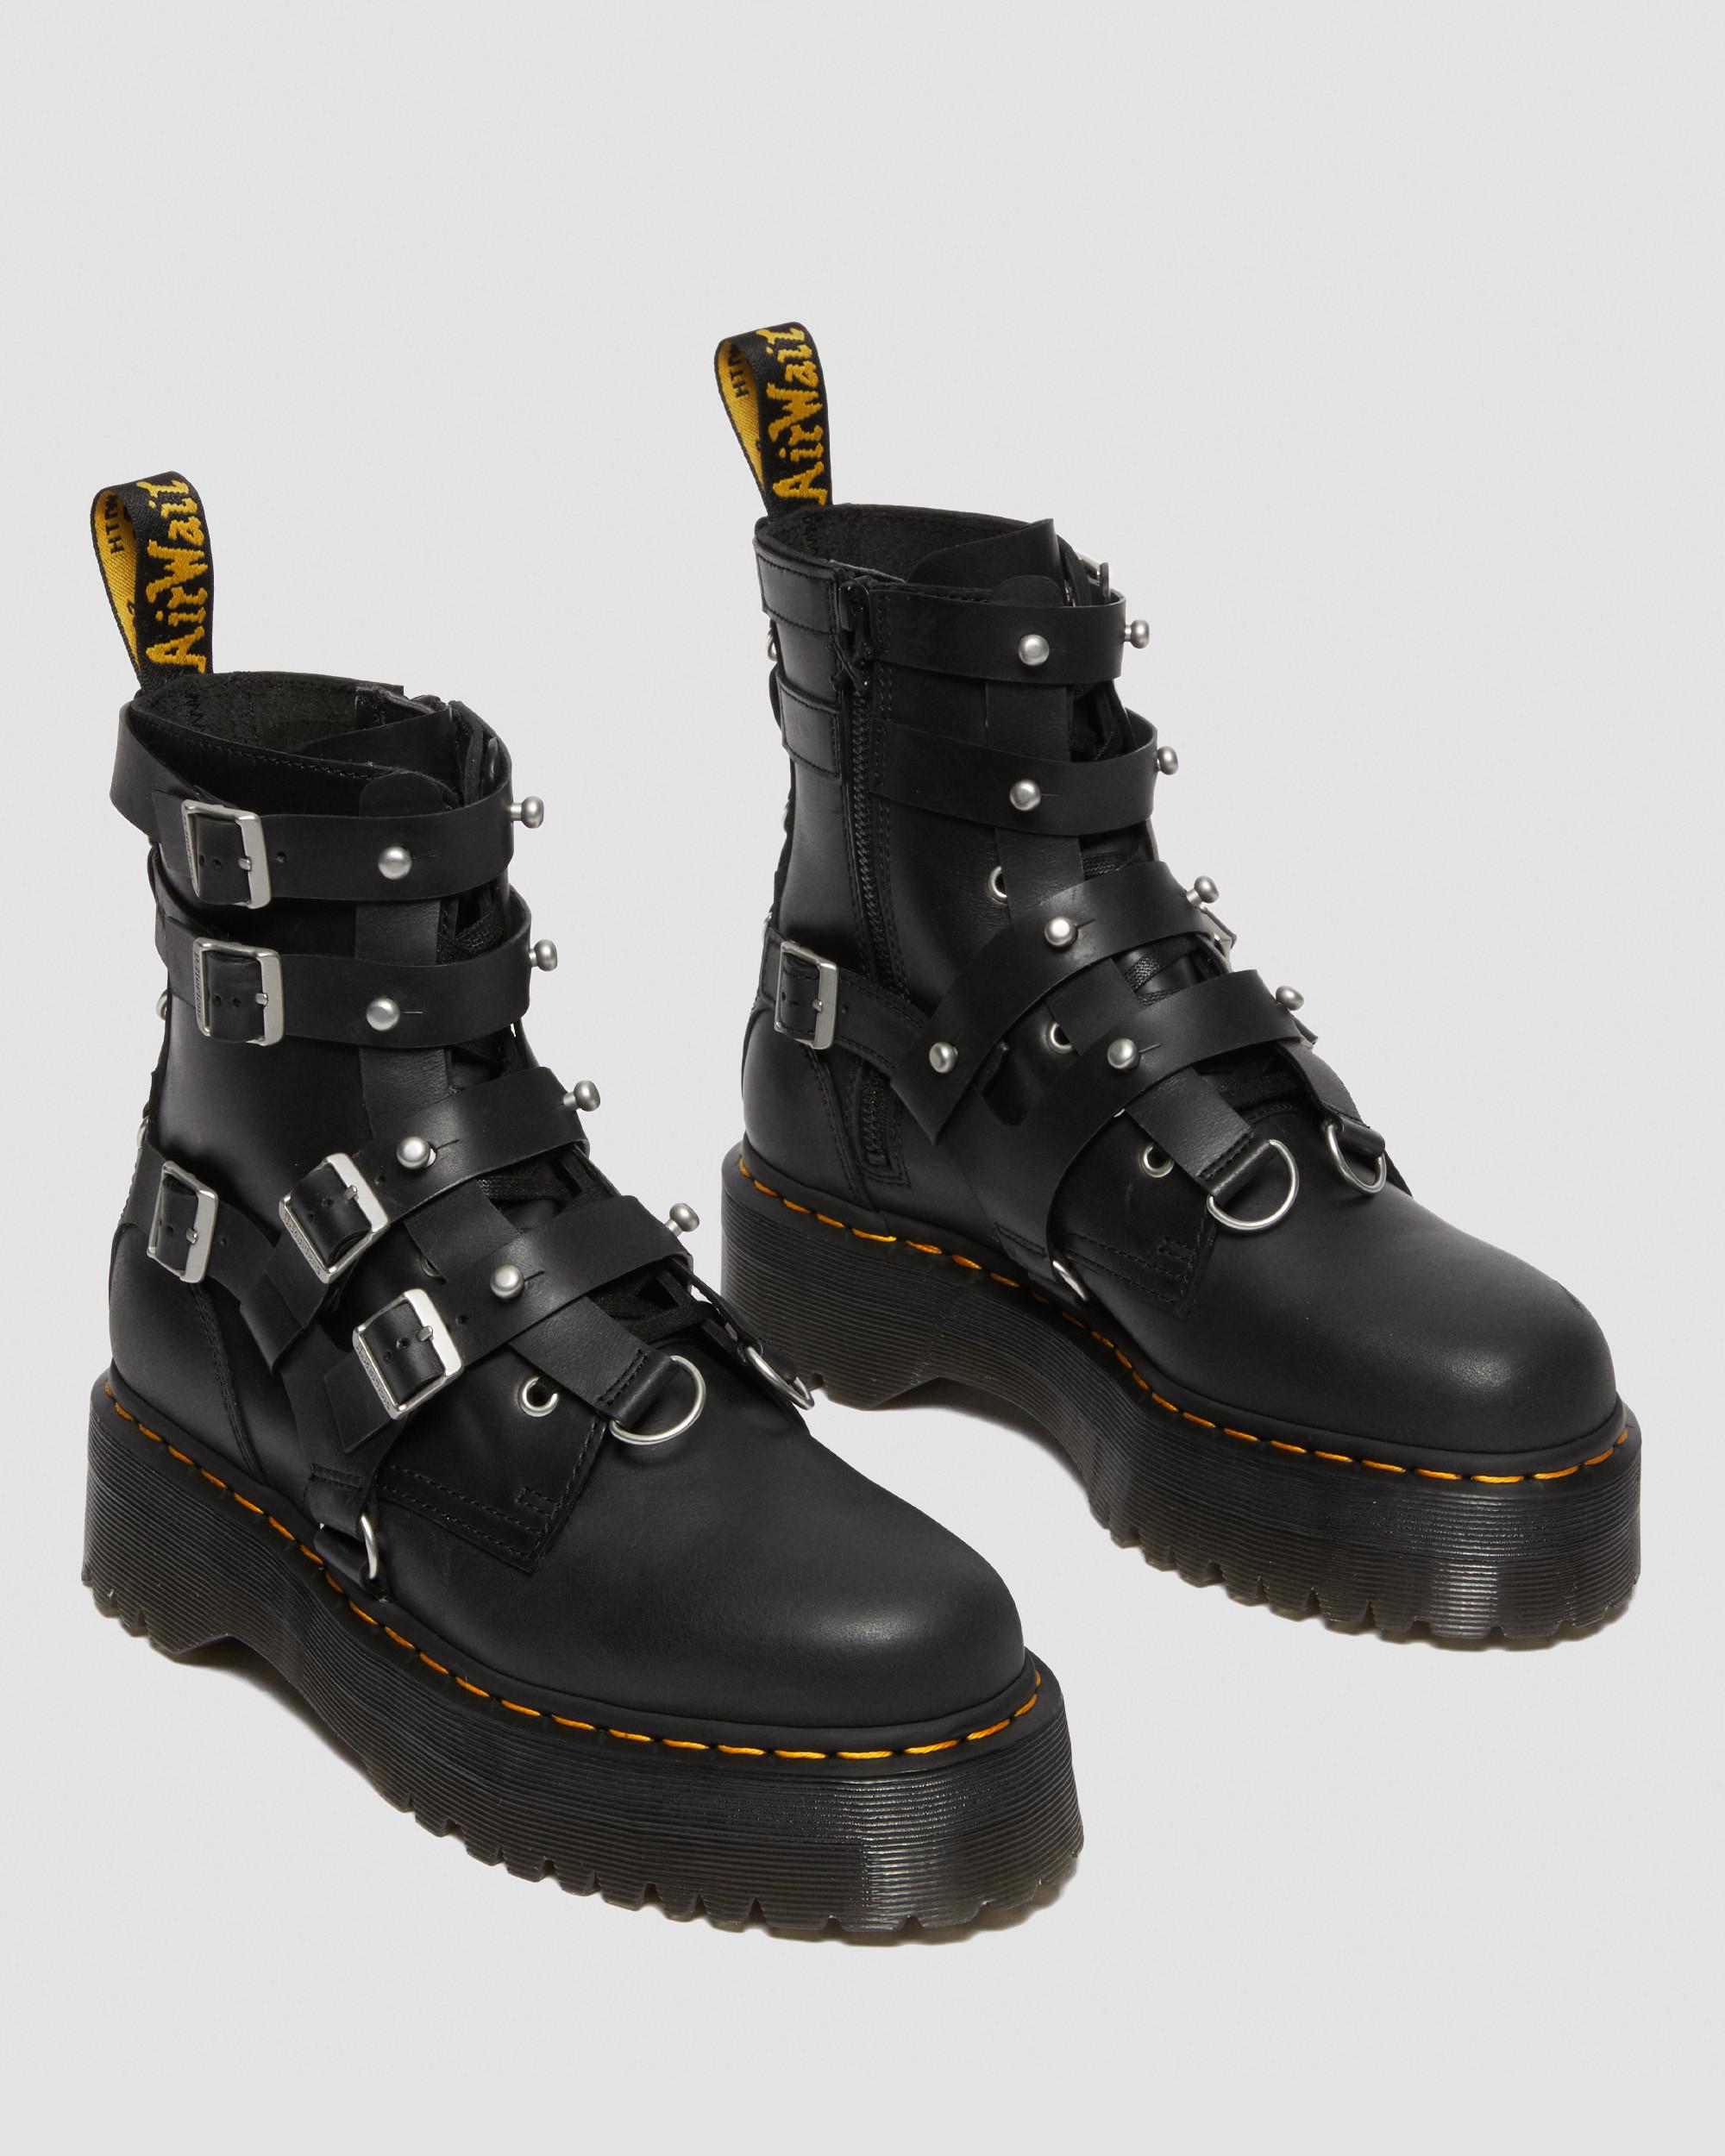 BOOTS PLATEFORMES JADON THE GREAT FROGBOOTS PLATEFORMES JADON THE GREAT FROG Dr. Martens